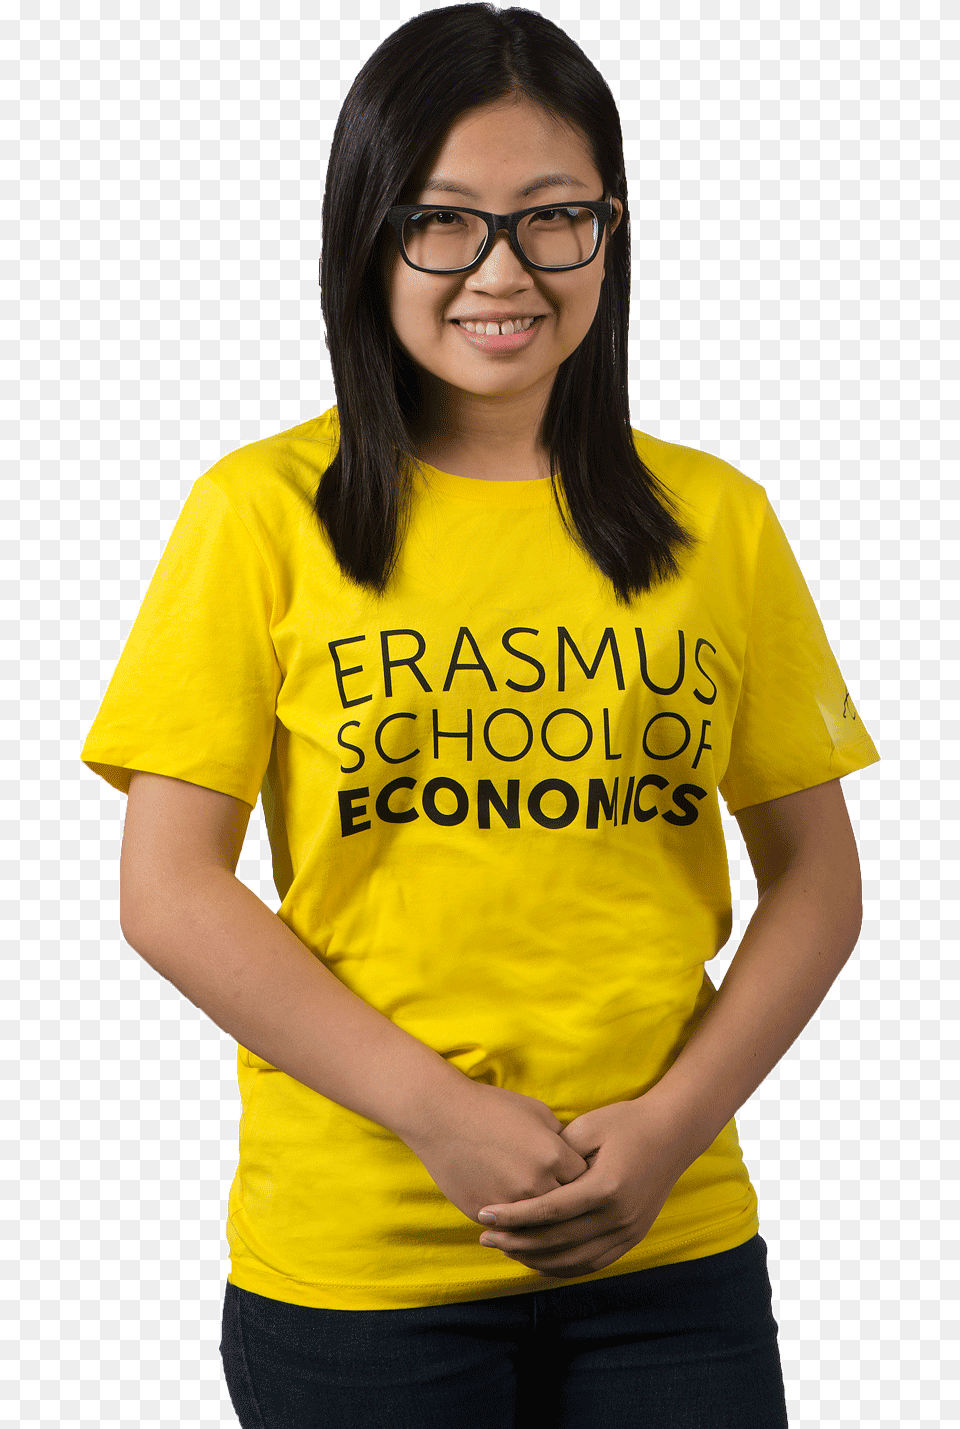 Ese Unisex T Shirt Yellowtitle Ese Unisex T Shirt Girl, Accessories, T-shirt, Clothing, Glasses Png